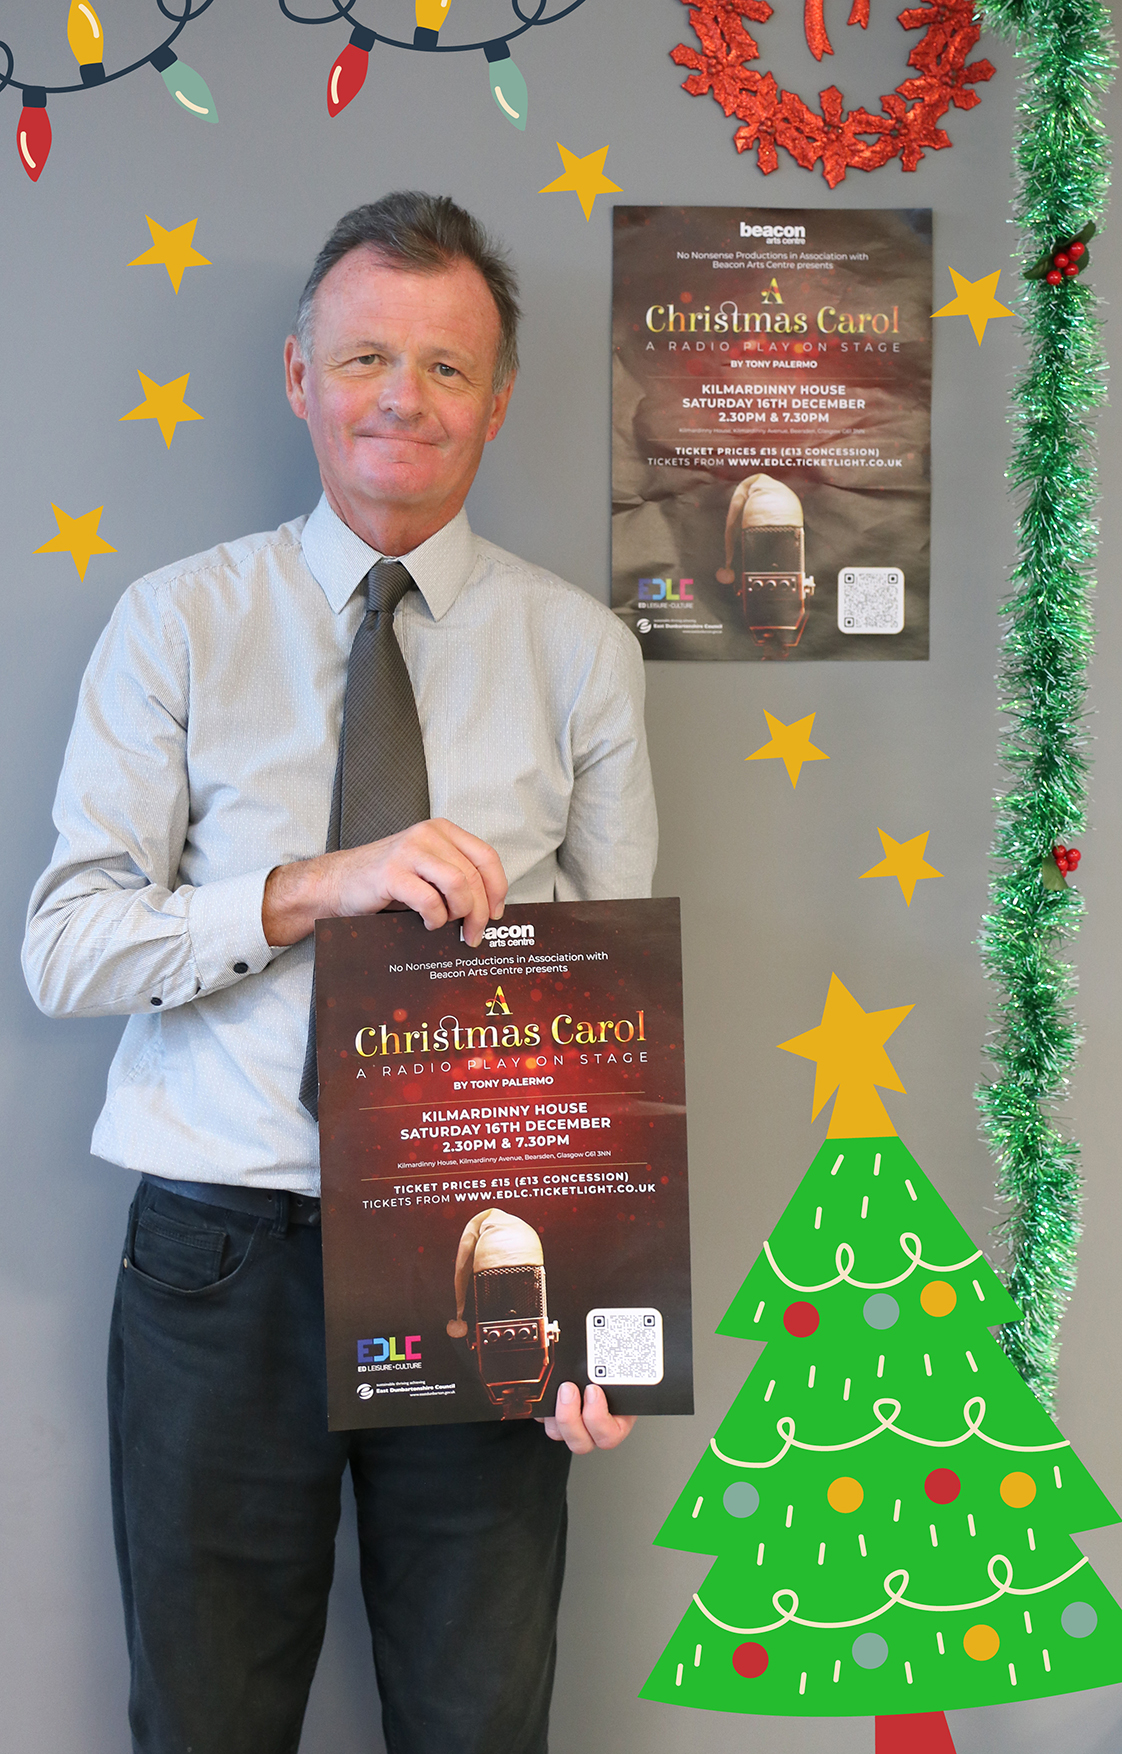 jim gibbons hold a chirstmas poster